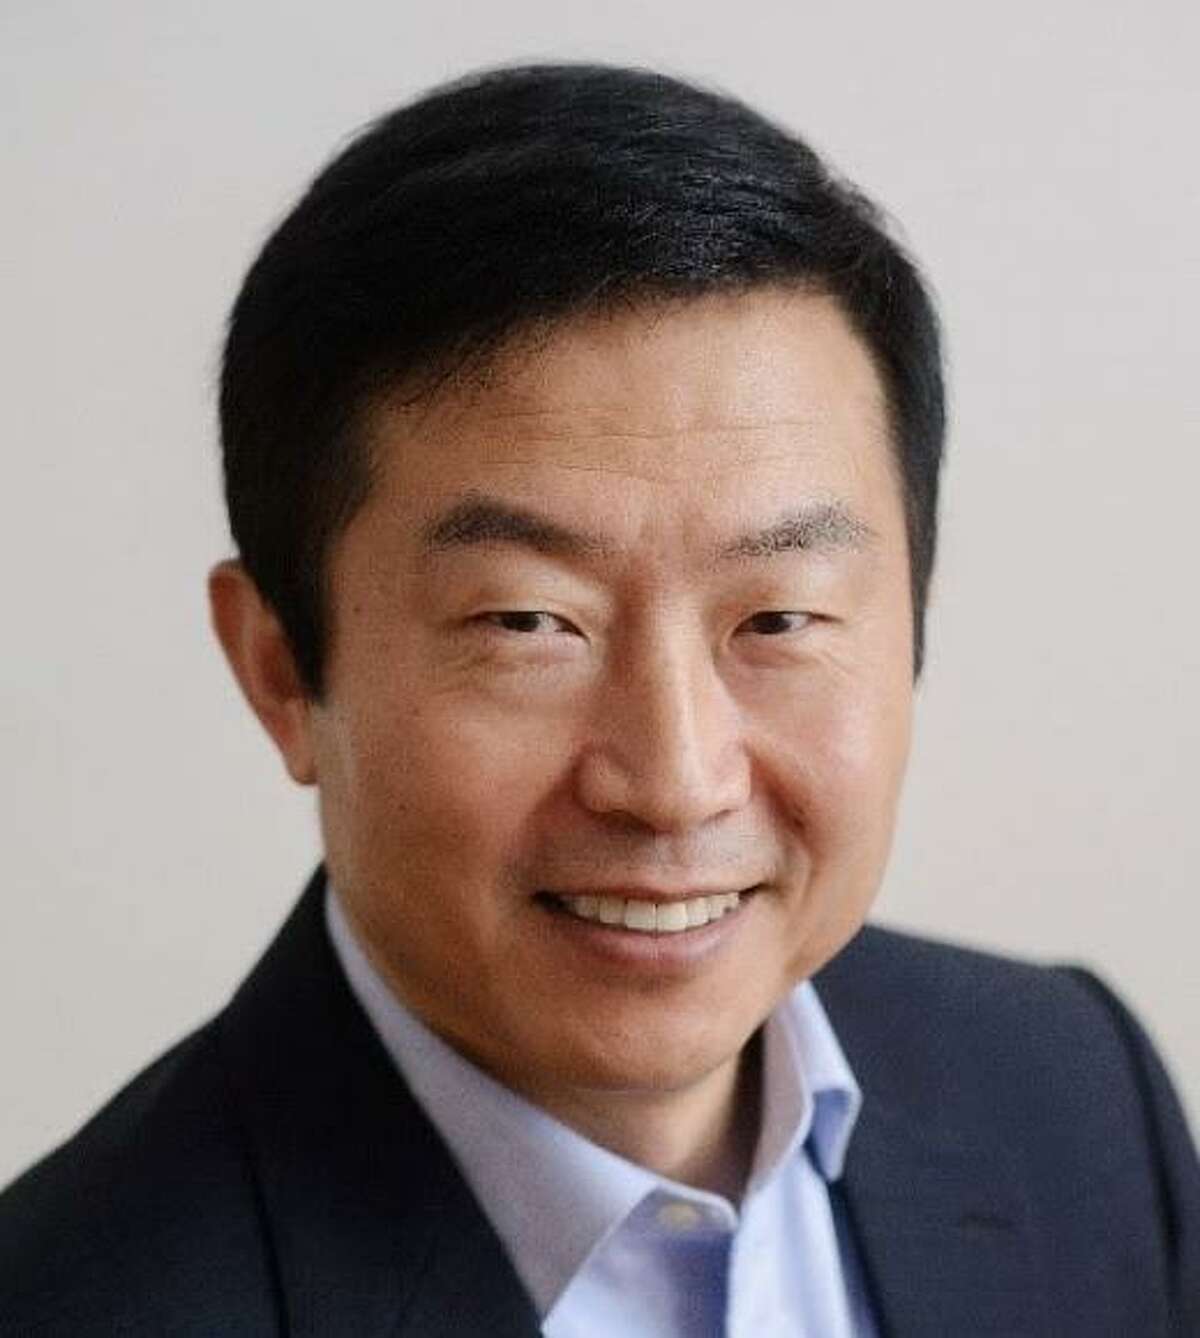 Professor Ting Guo, UC Davis was terminated after an investigation found he sexually assaulted an 18-year-old high school student.